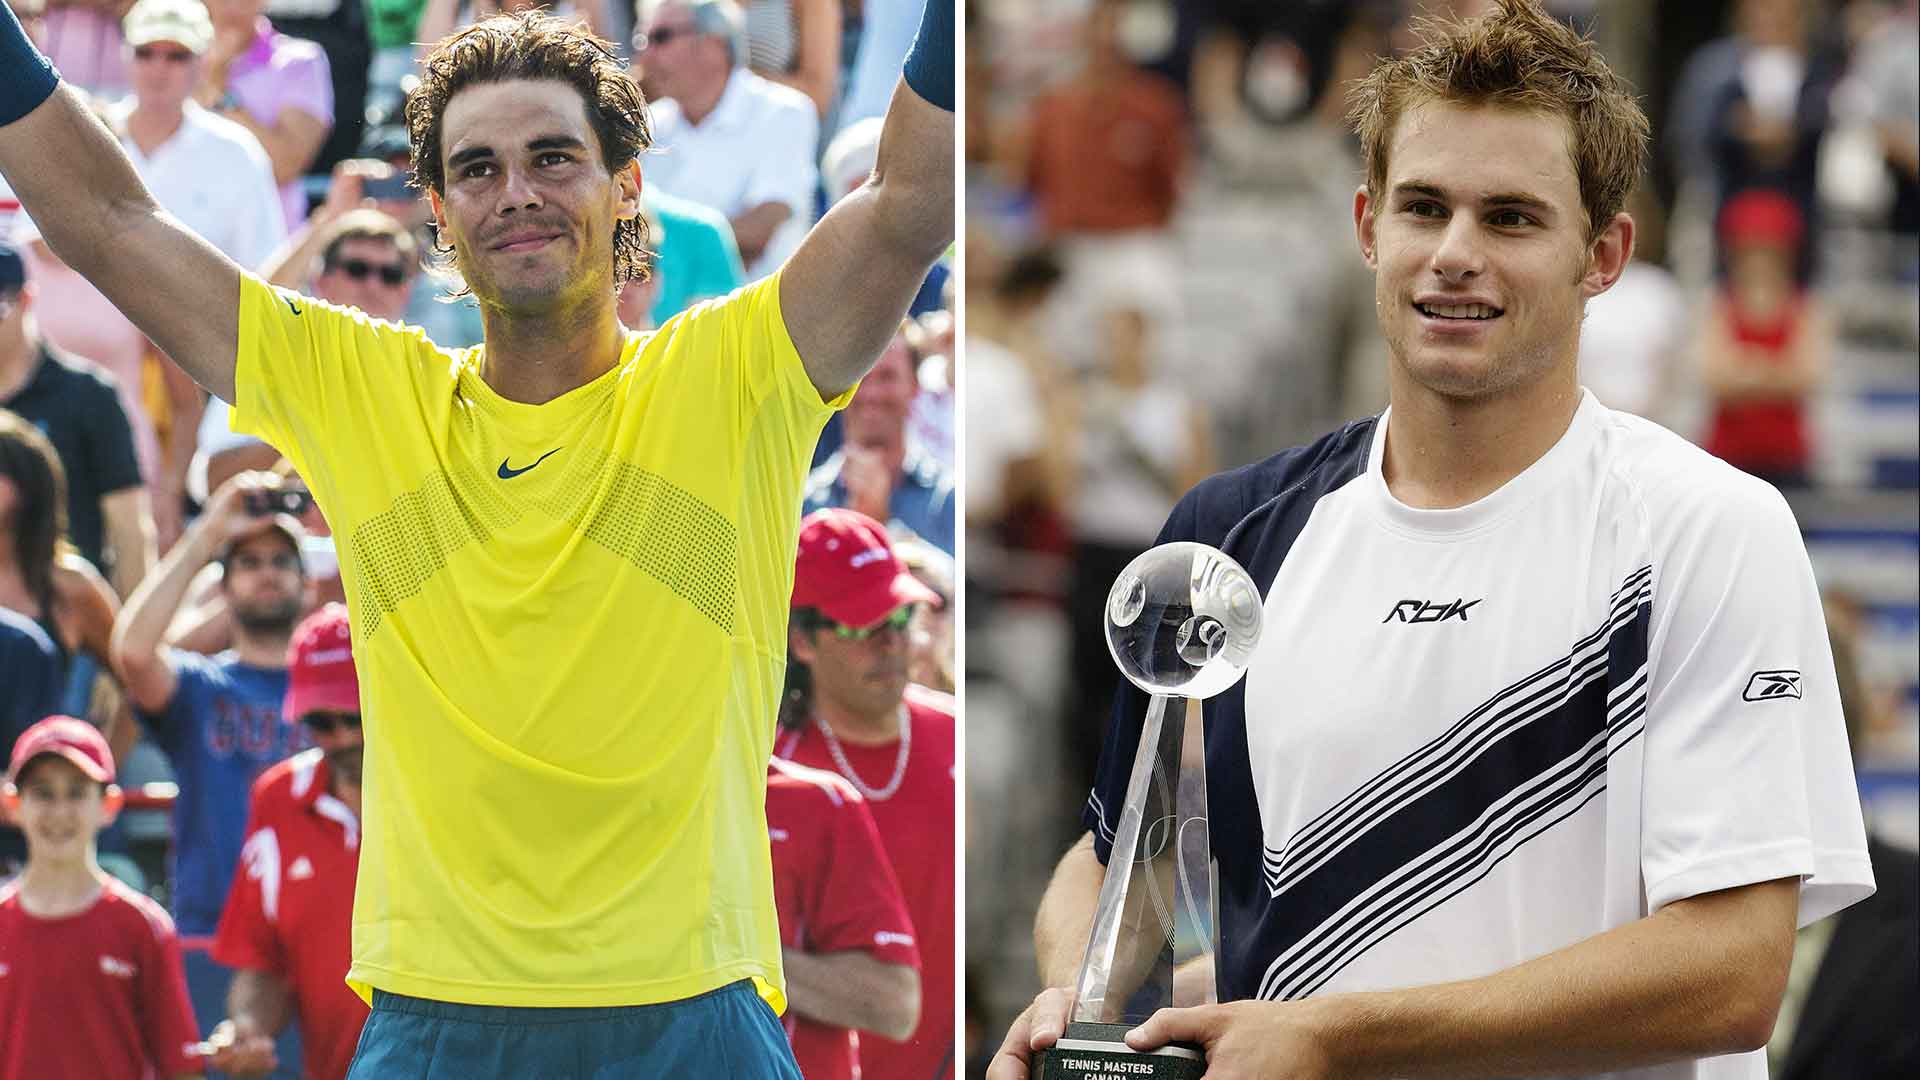 Rafael Nadal and Andy Roddick won in Montreal in 2013 and 2003, respectively.